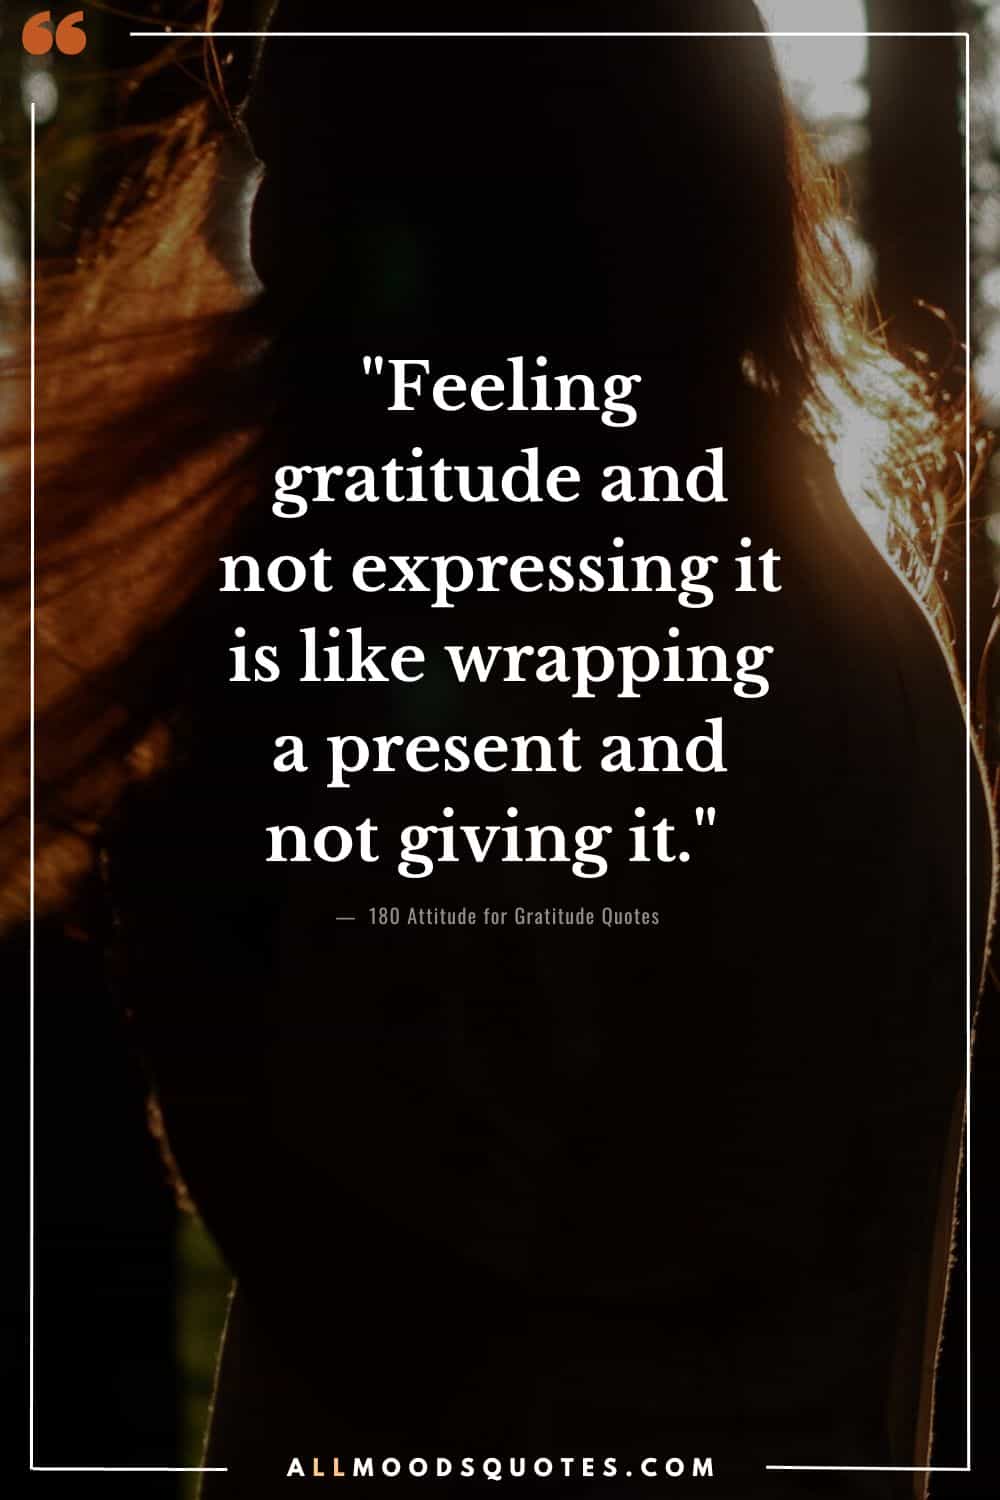 "Feeling gratitude and not expressing it is like wrapping a present and not giving it." - William Arthur Ward